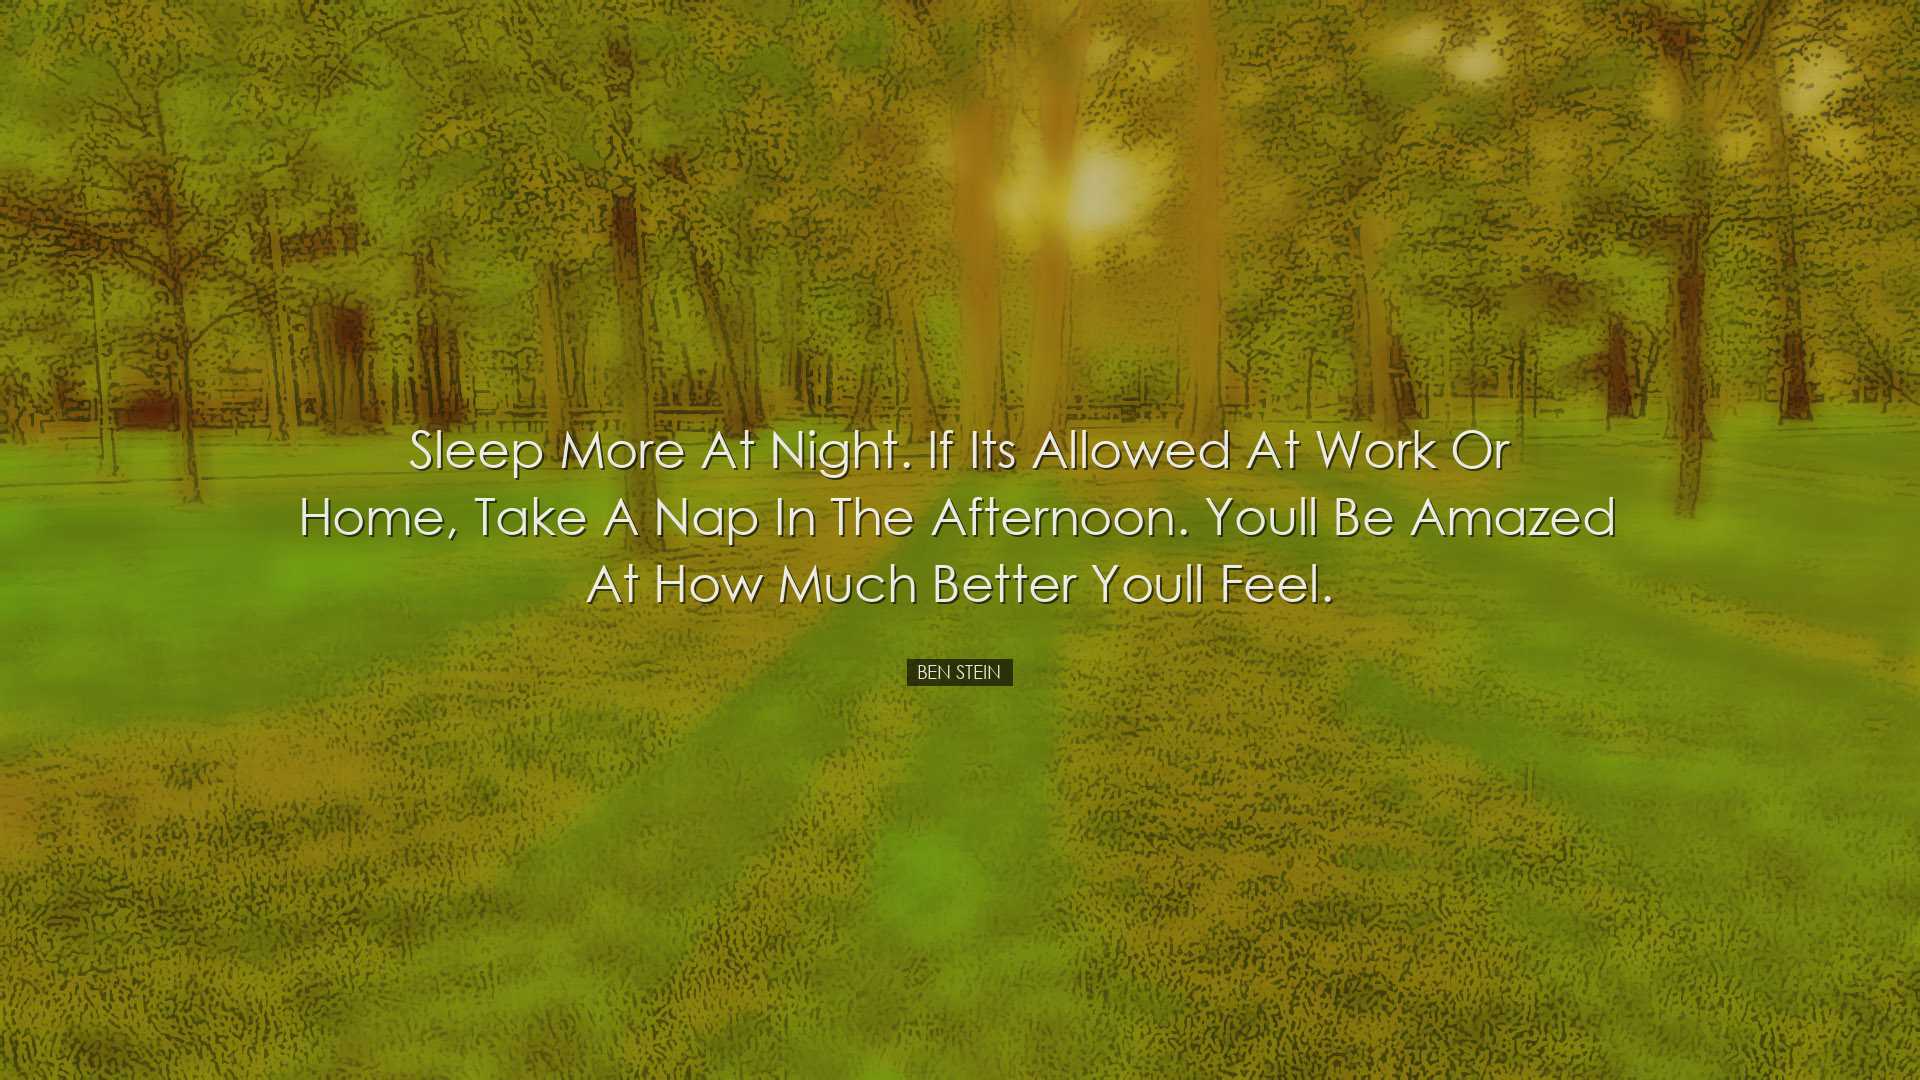 Sleep more at night. If its allowed at work or home, take a nap in